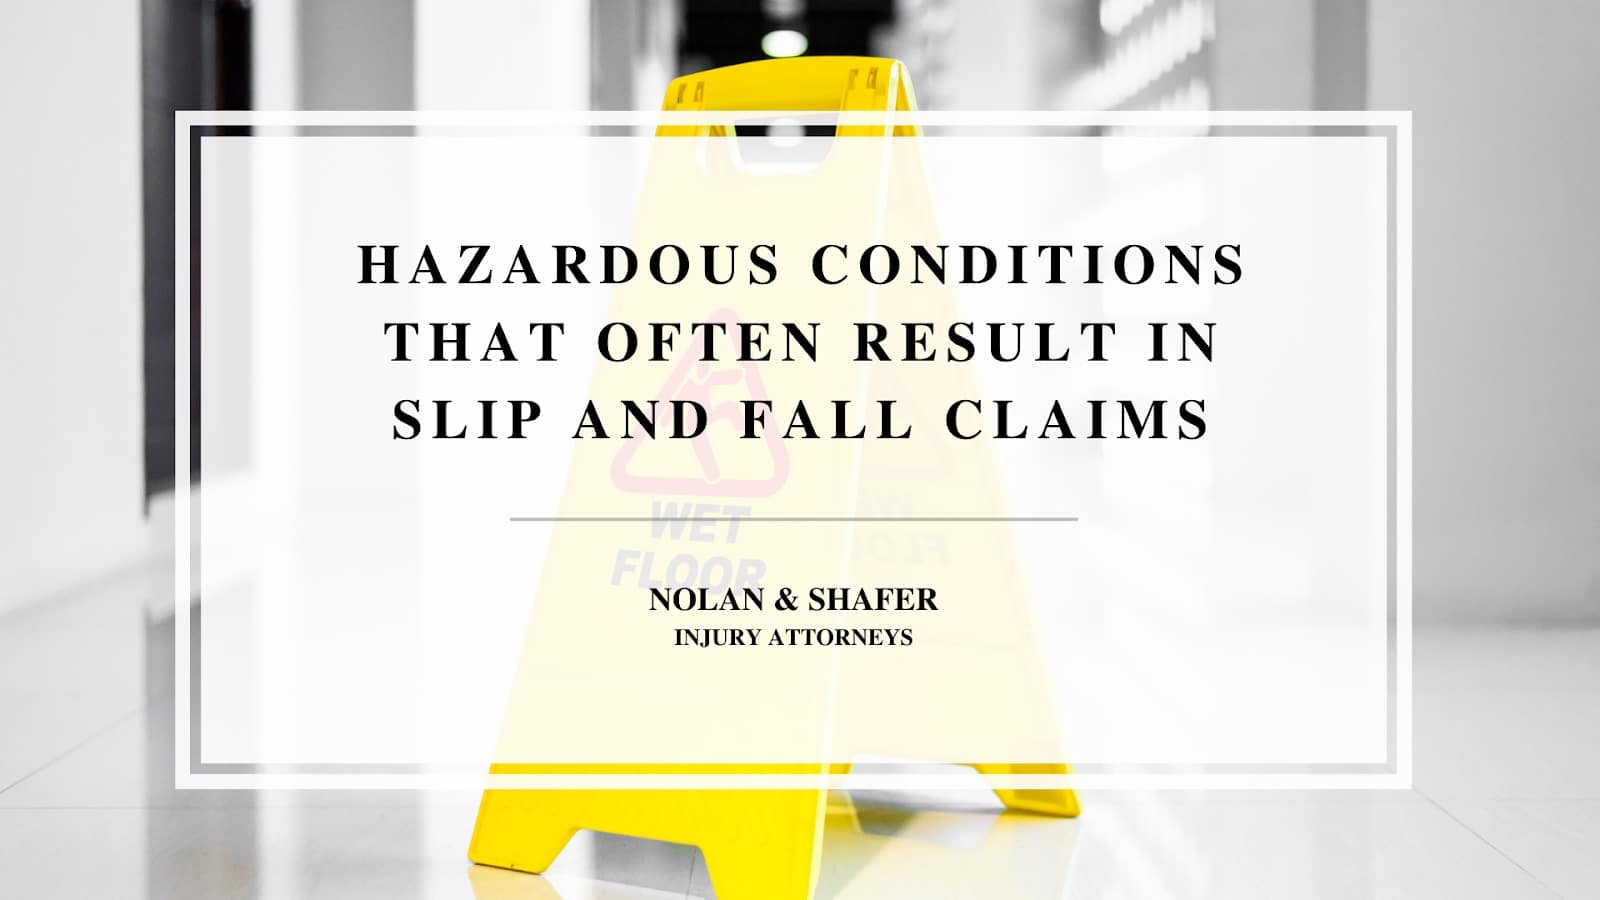 A wet floor signage overlaid with text: Hazardous Conditions, Slip and Fall Claims